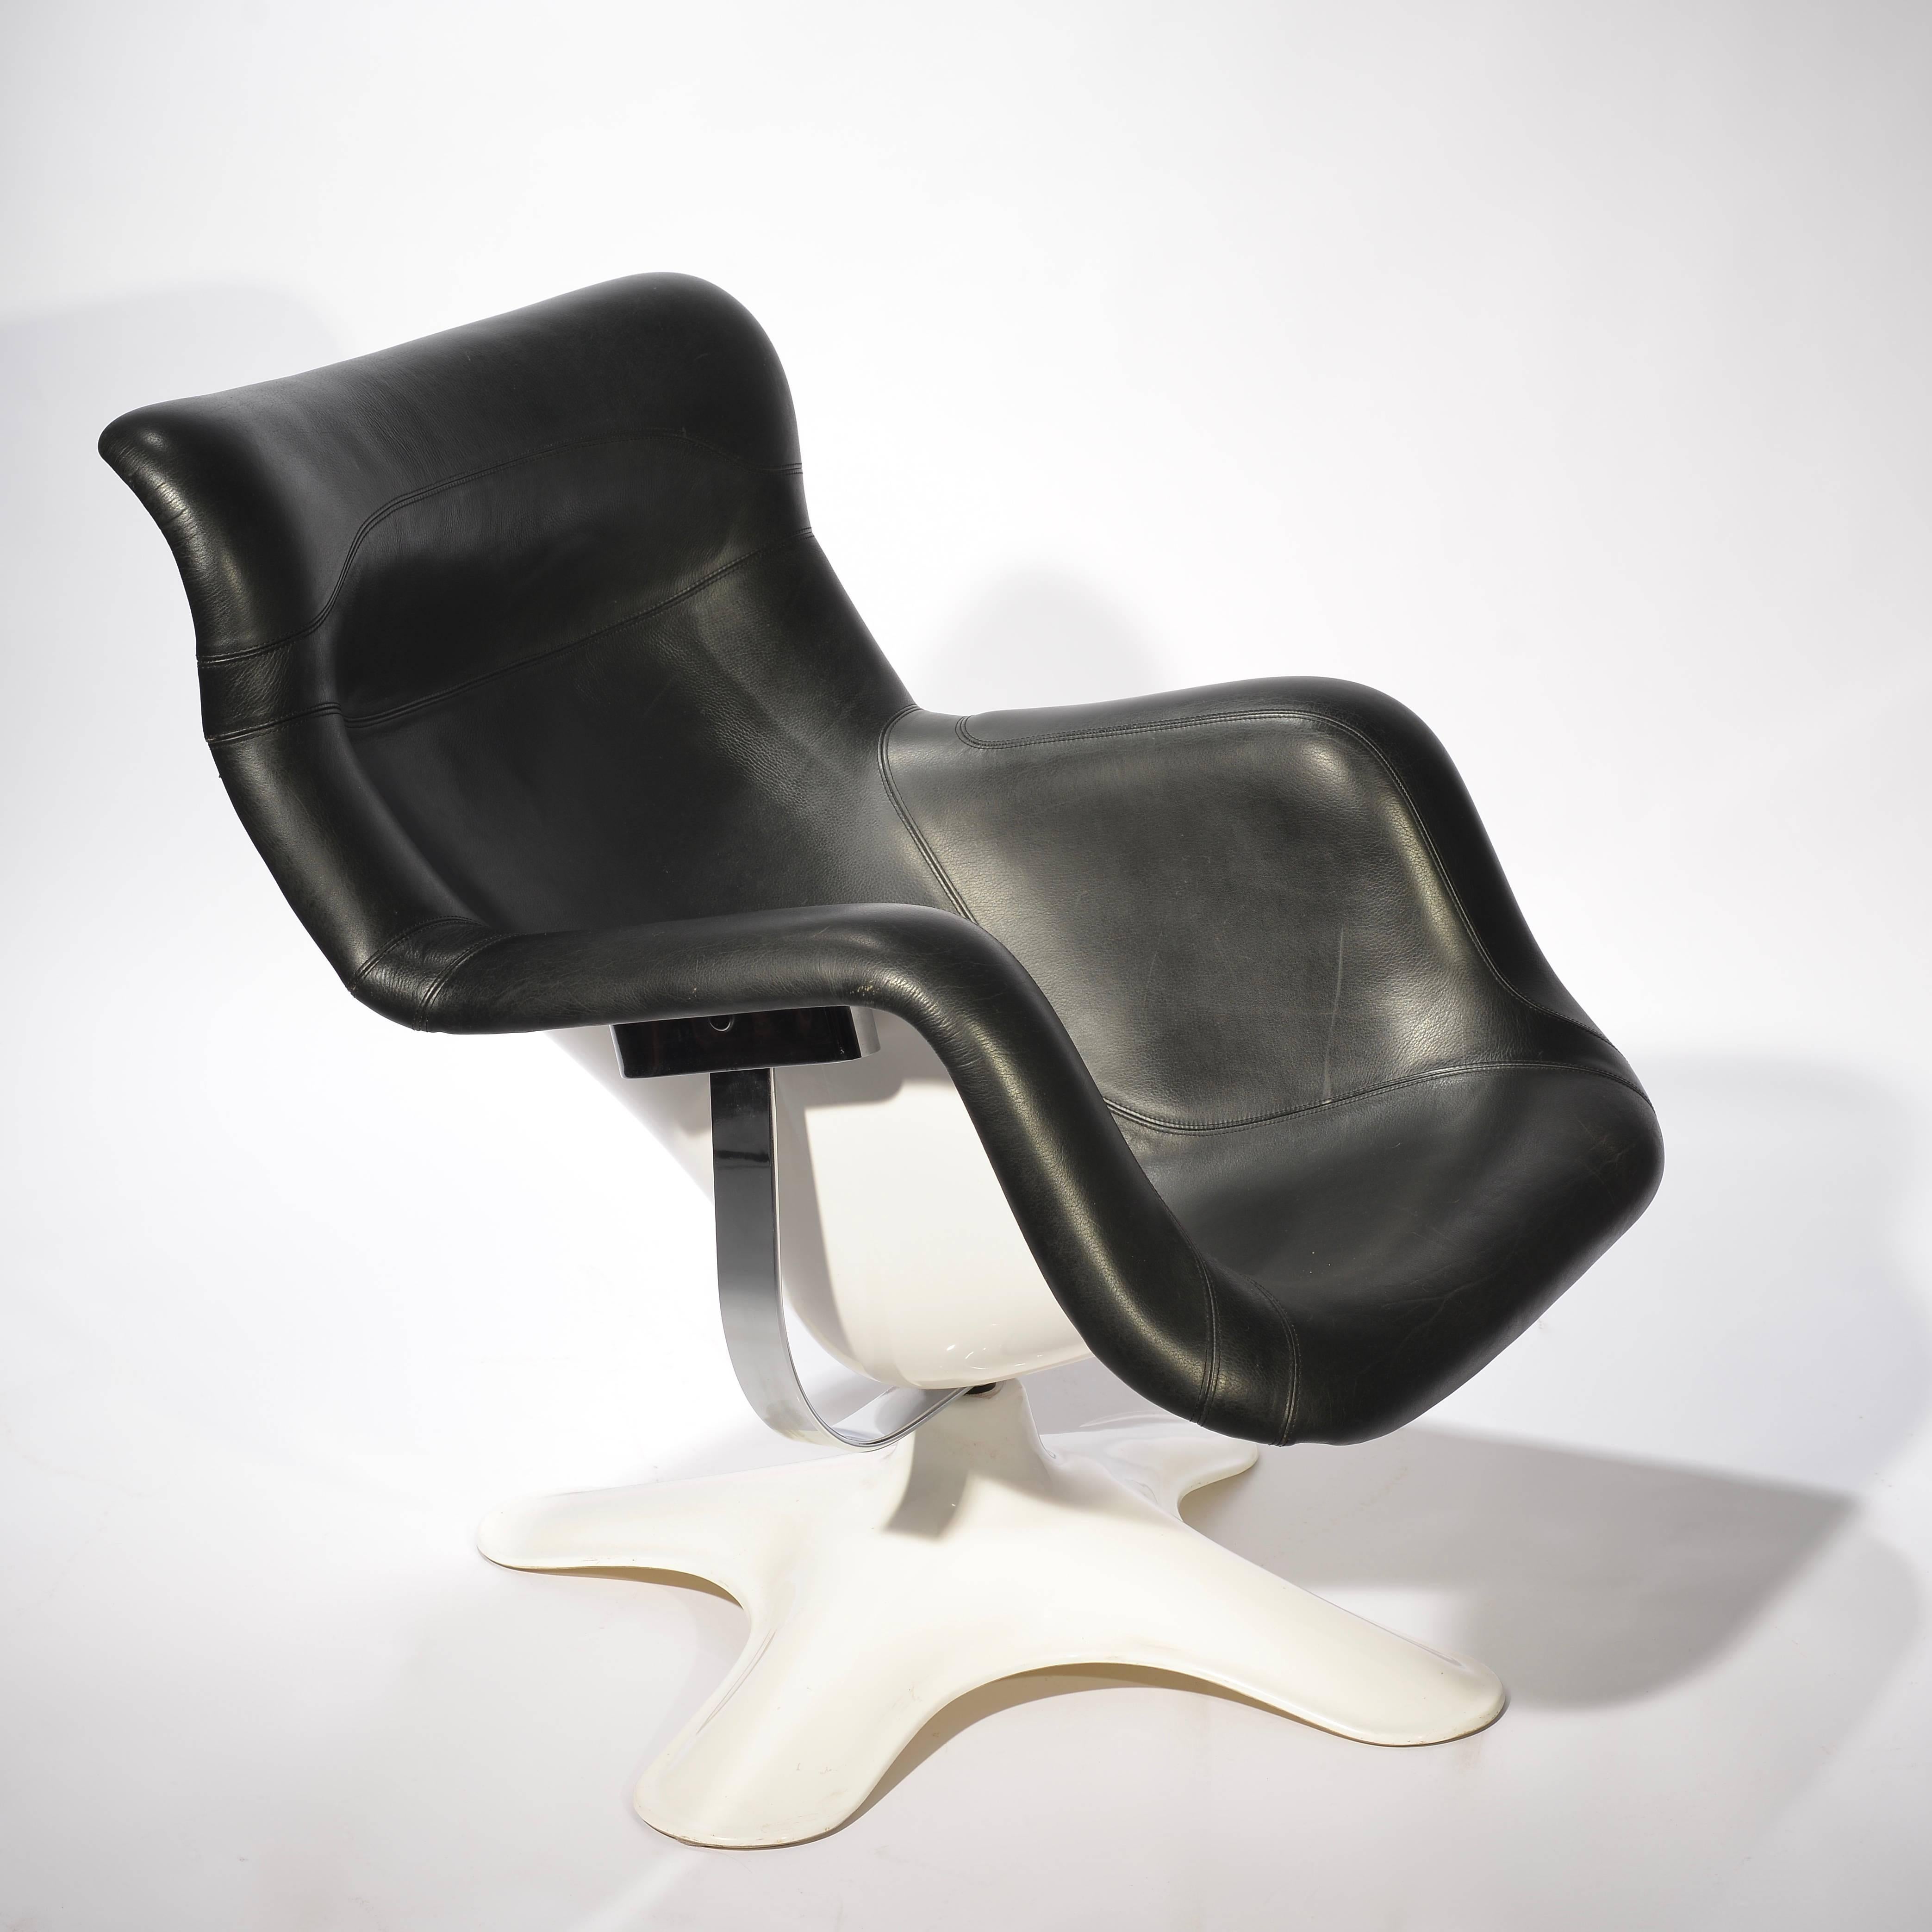 Karuselli lounge chair designed in 1965 by Yrjo¨ Kukkapuro.
This swivel chair has a fiberglass seat shell and base. Leather upholstery, chrome, and fiberglass in amazing condition.
Quite possibly the most comfortable chair ever made!